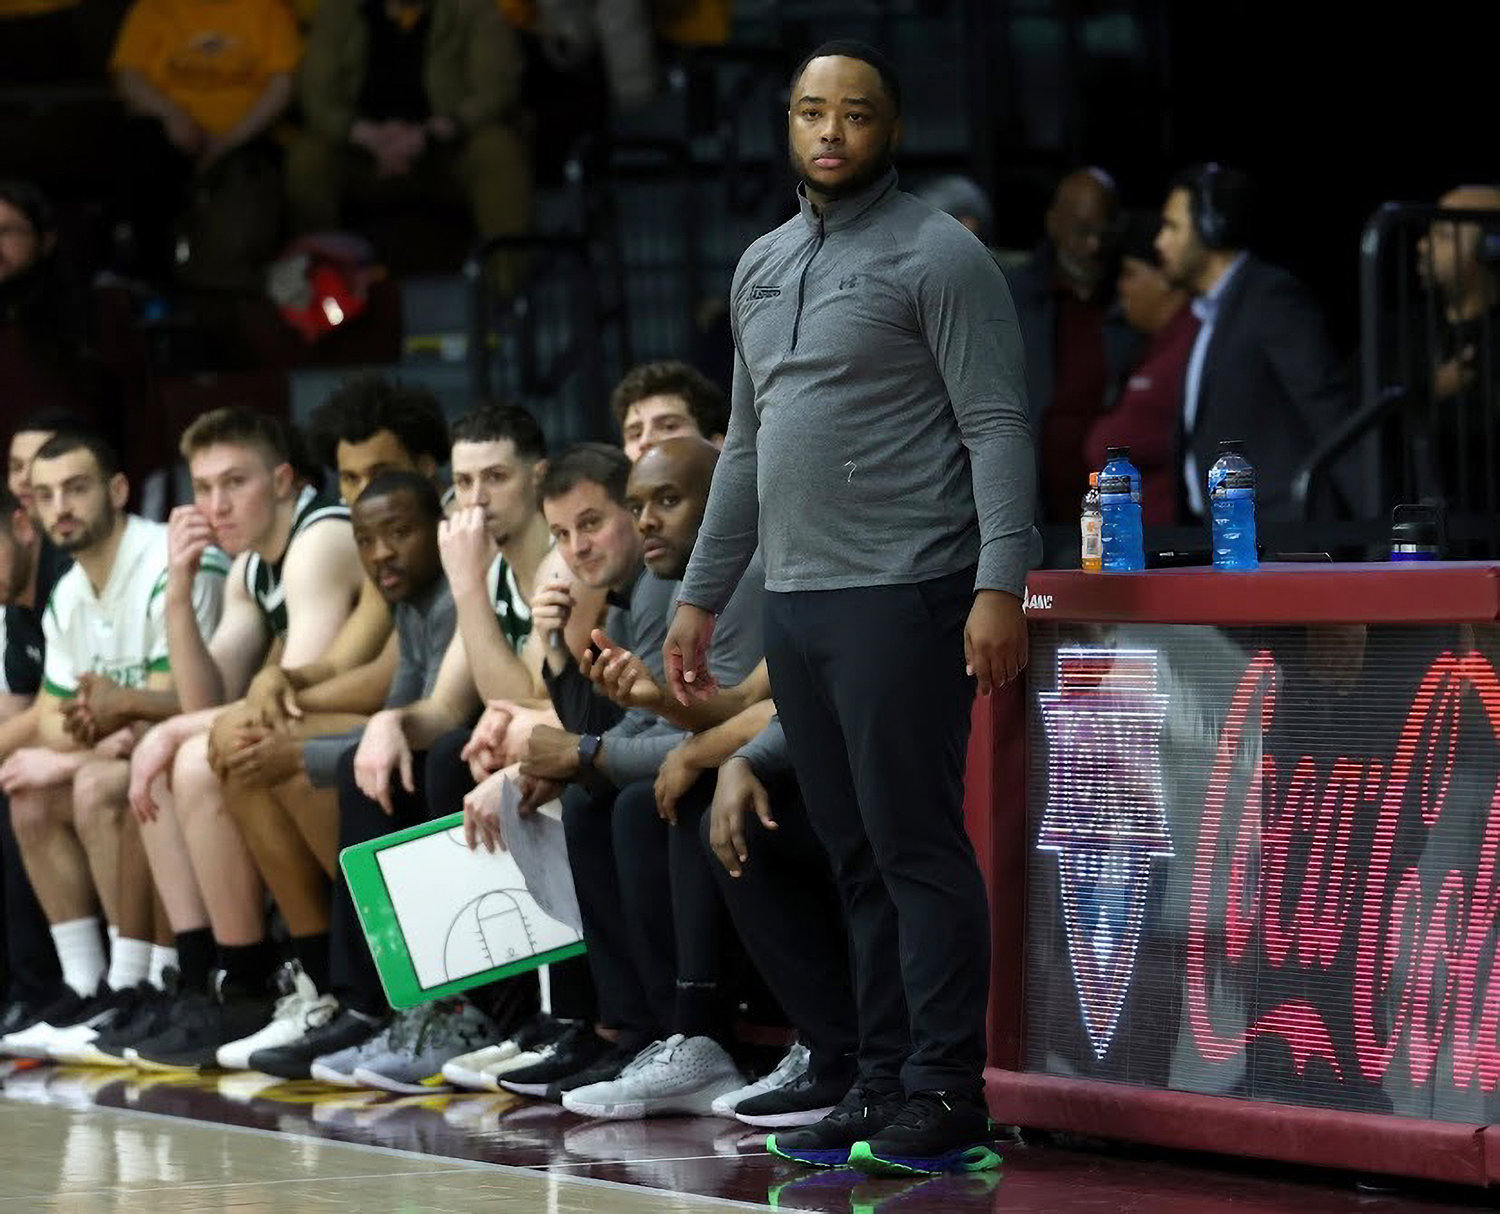 In his first season at the helm for Manhattan, interim head coach RaShawn Stores has led his team to a 10-15 record overall that has surpassed expectations. The Jaspers are 8-8 against league foes in the Metro Atlantic Athletic Conference.